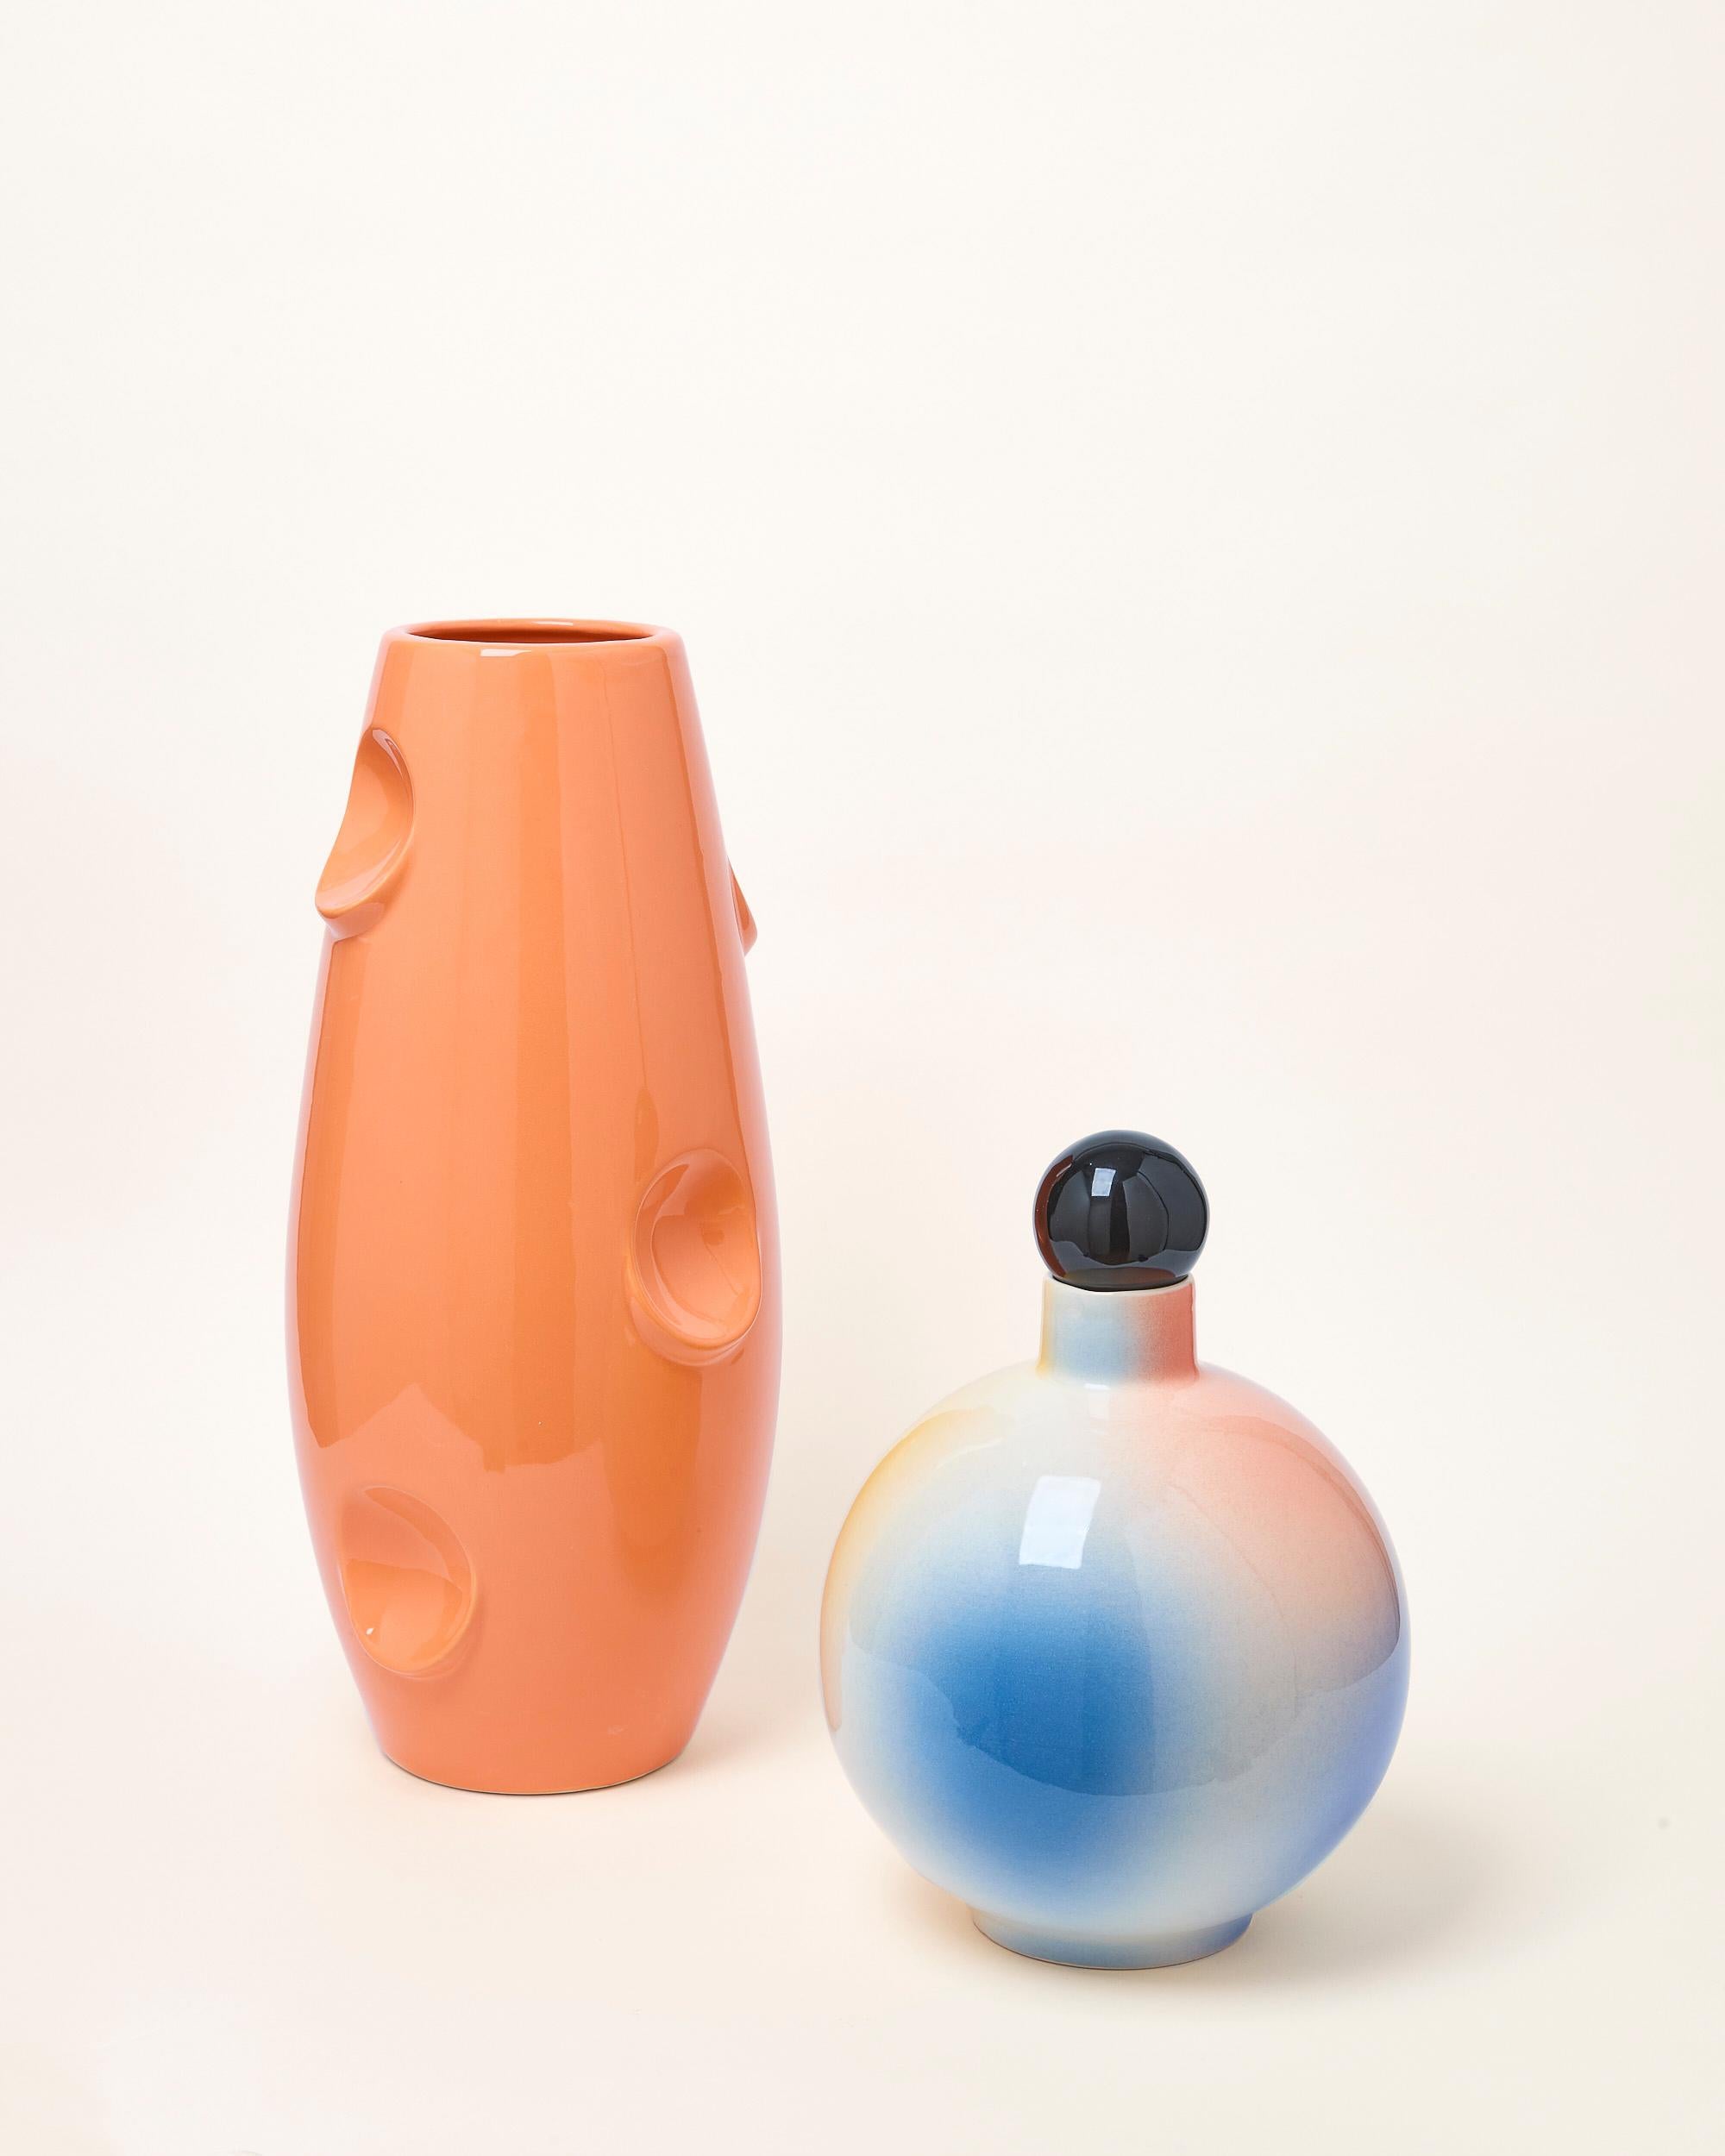 The OKO Vase is Malwina Konopacka's most renowned design. Its name comes from the oval recesses within the vase's form, which give the object a spatial character, functioning as a standalone sculpture when devoid of flowers.

The OKO in the Forms